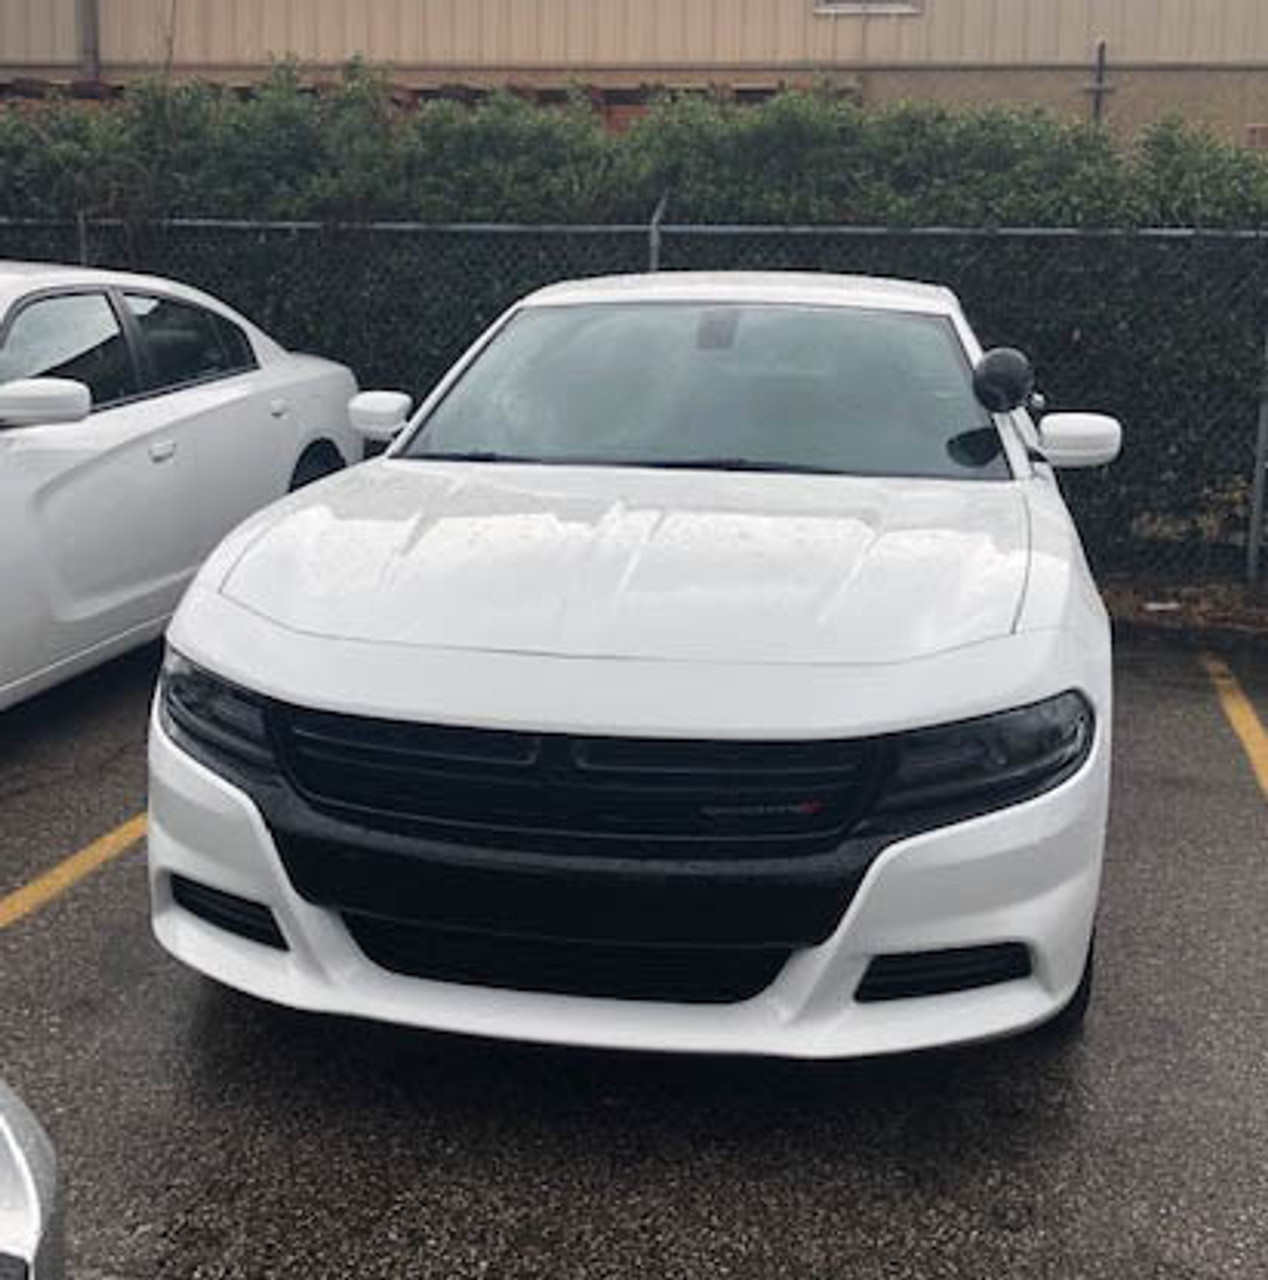 New 2023 White Dodge Charger PPV V8 RWD ready to be built as a Marked Patrol Package Police Pursuit Car (Emergency Lighting, Siren, Controller, Partition, Window Bars, etc.), WCM5, + Delivery